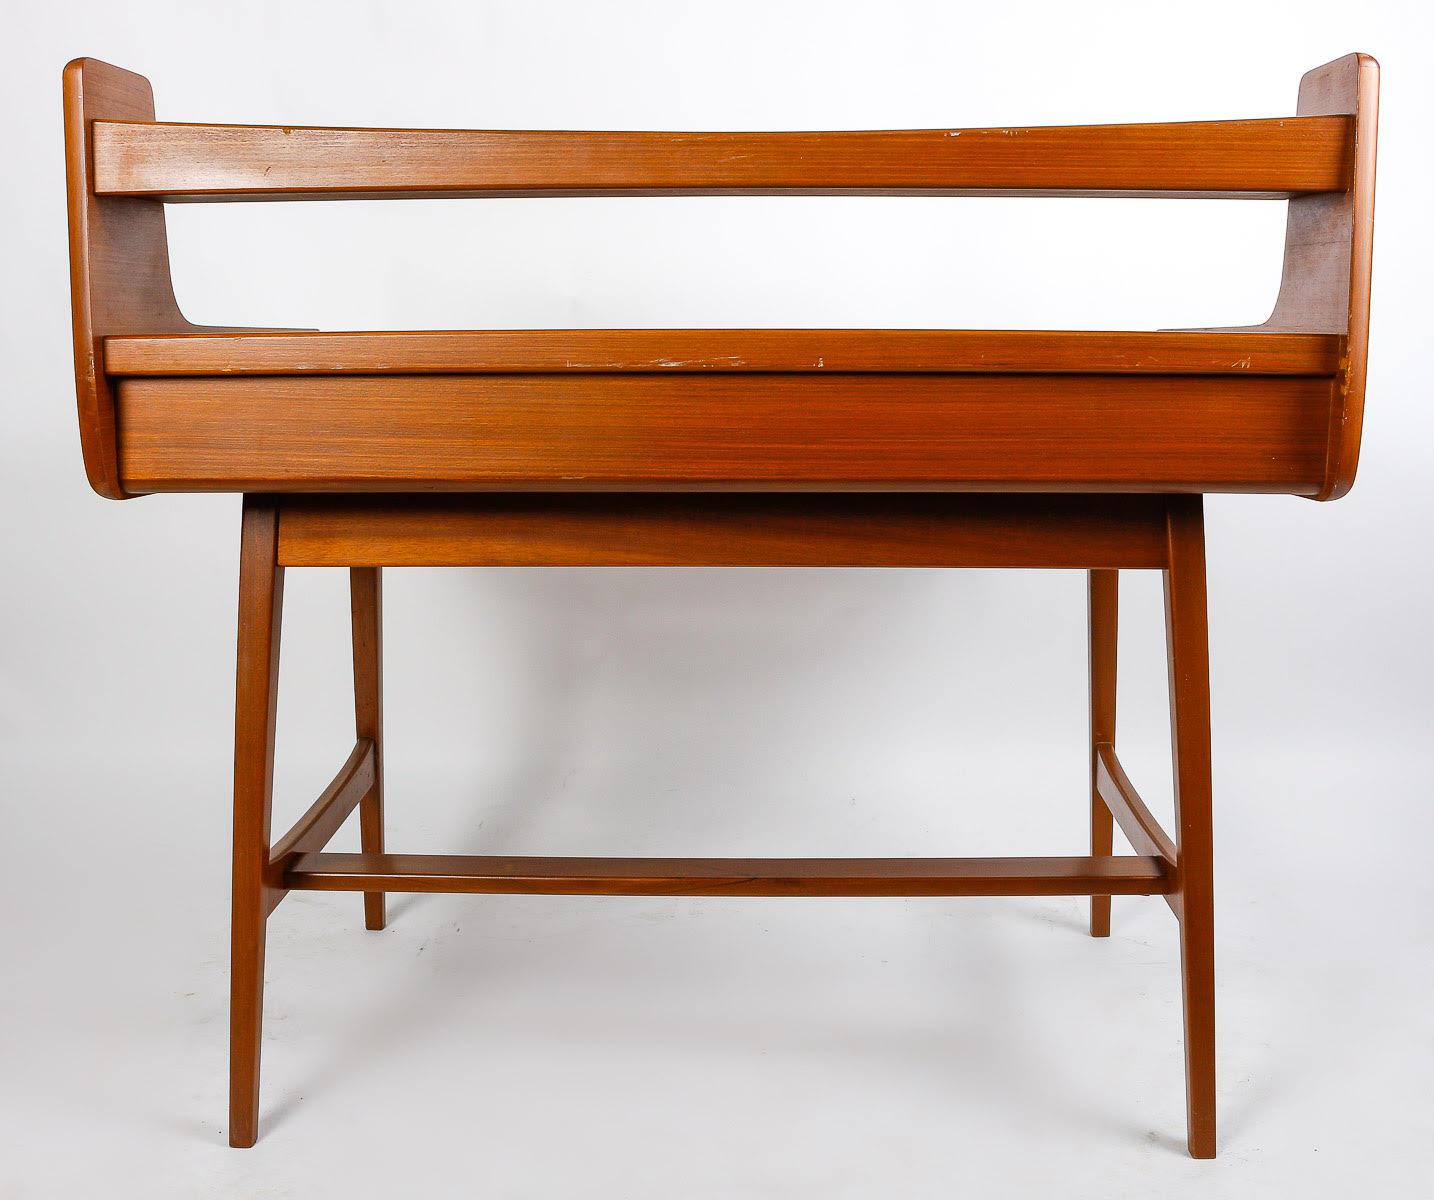 Wood Desk by Jacques Hauville, circa 1960.